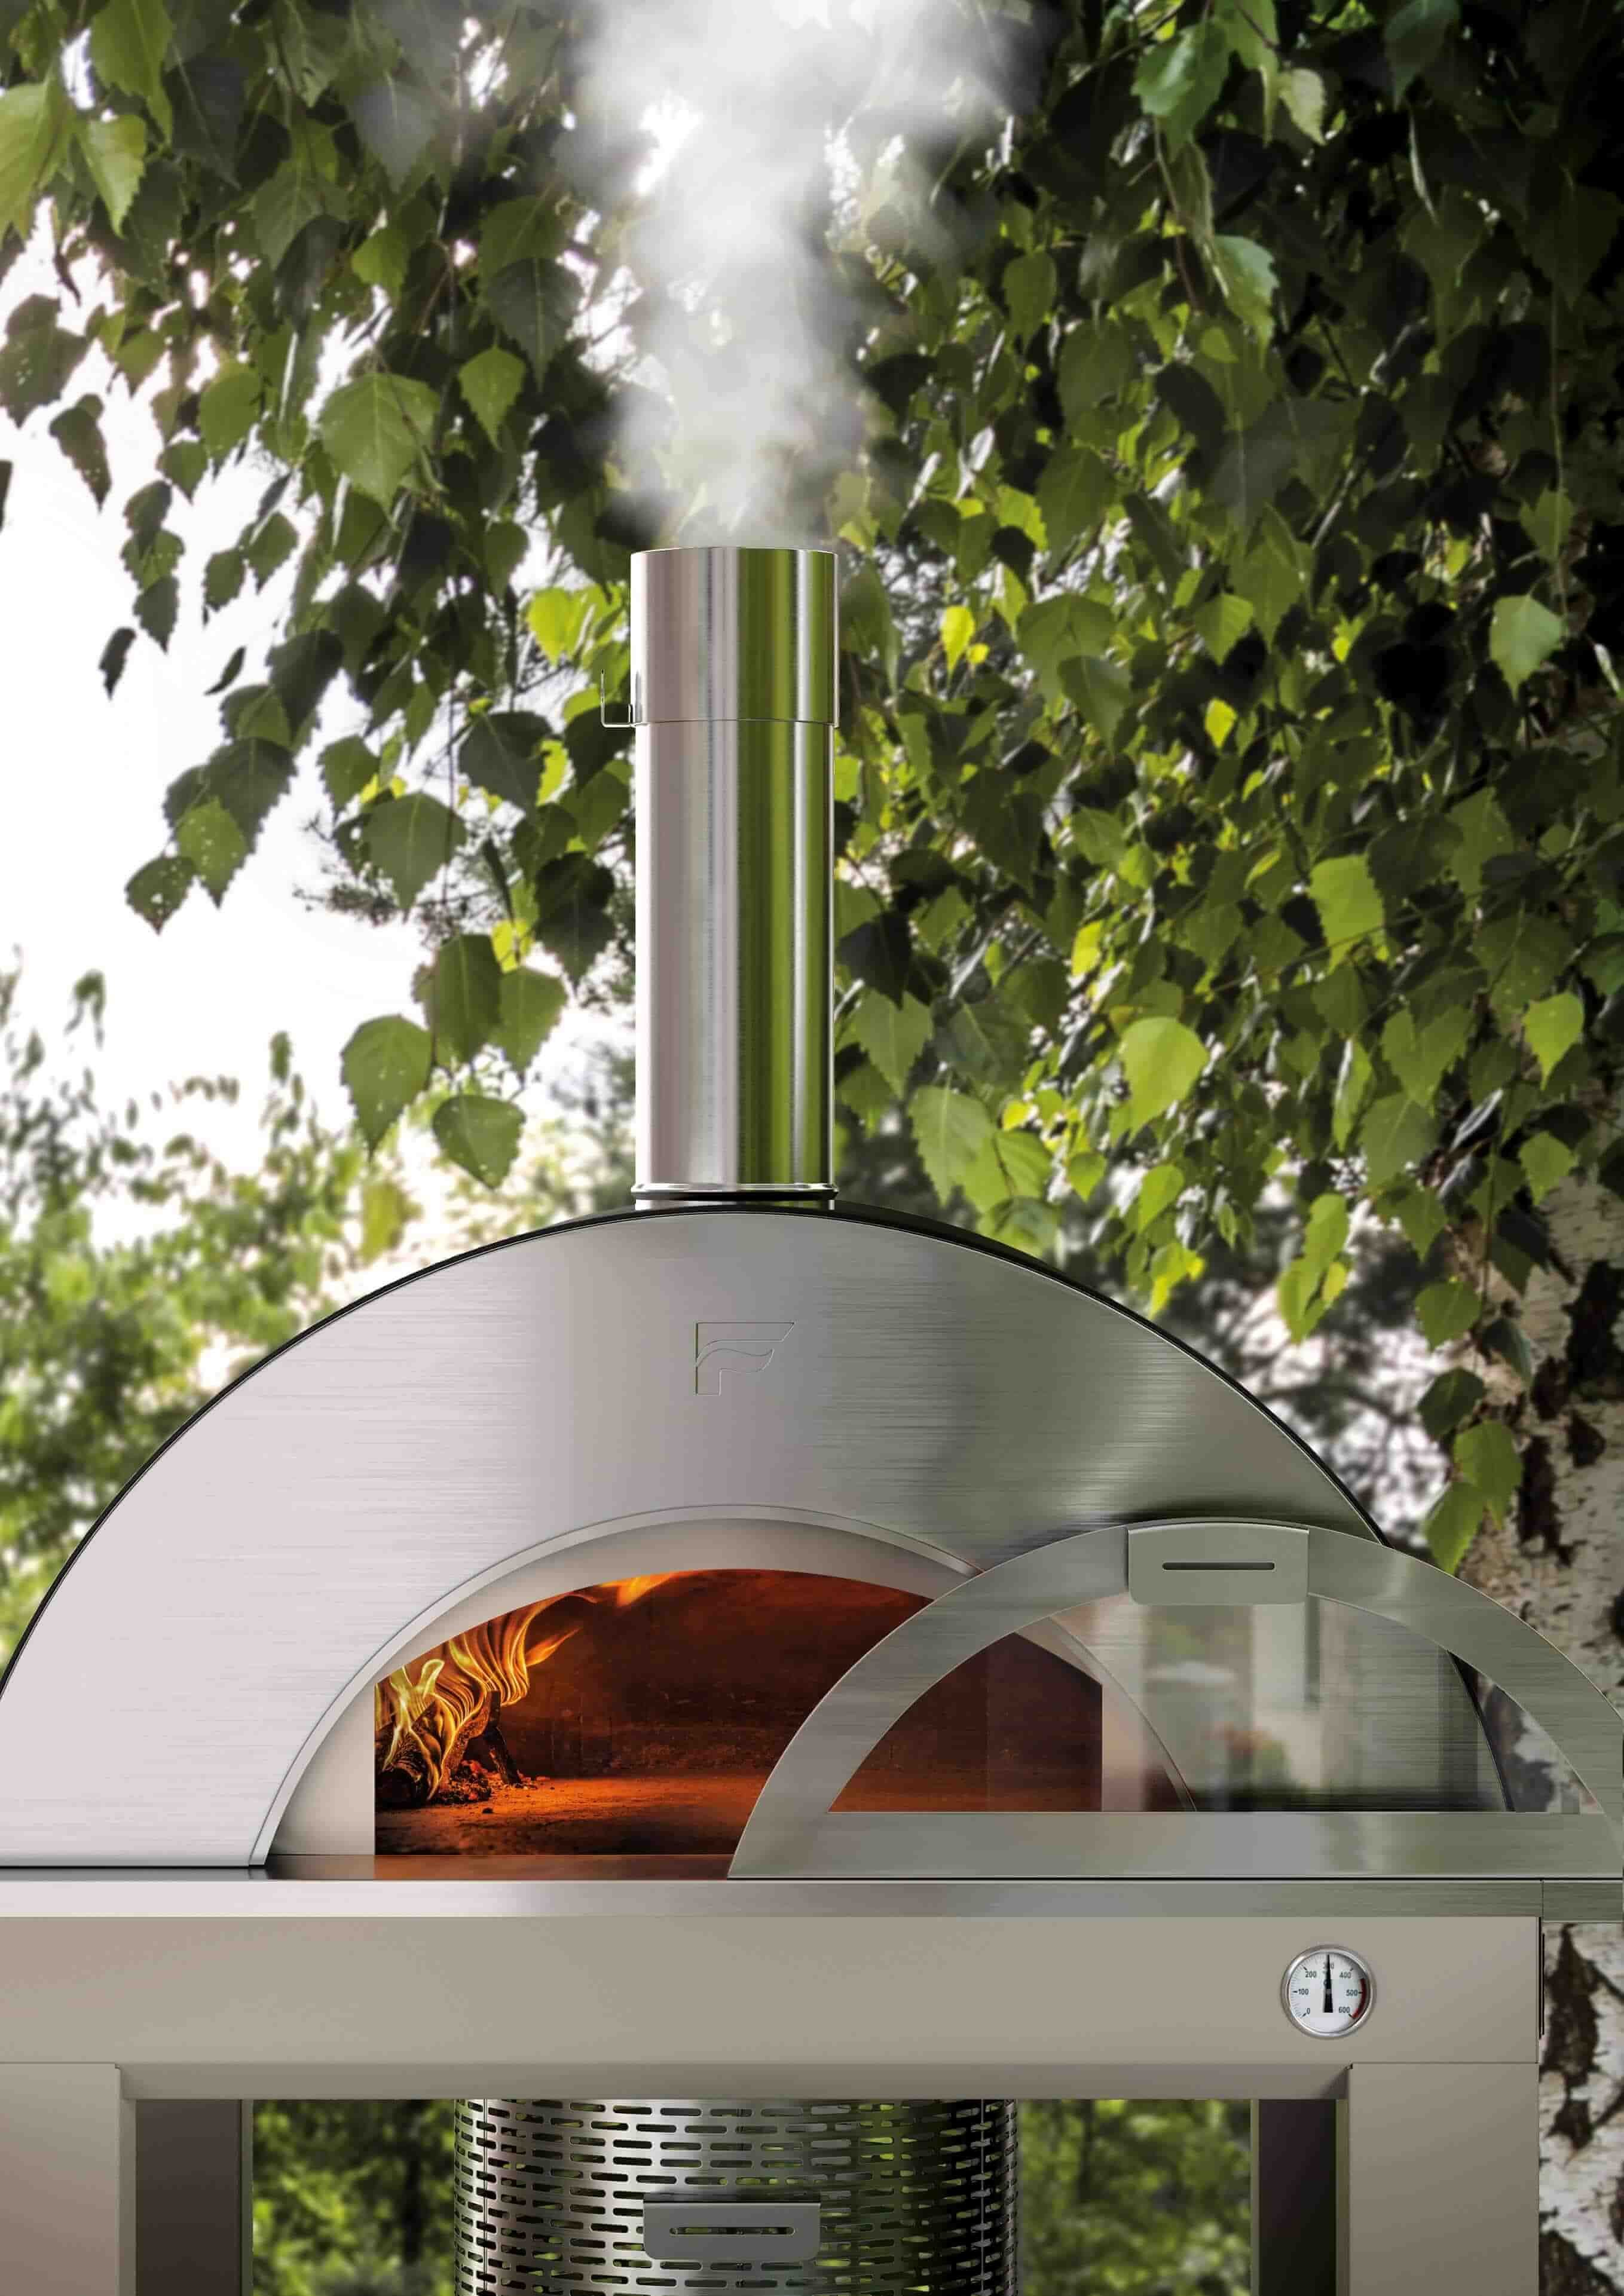 Pizza oven Fontana Bellagio, stainless steel dome oven with wood firing and glass door, tabletop pizza oven